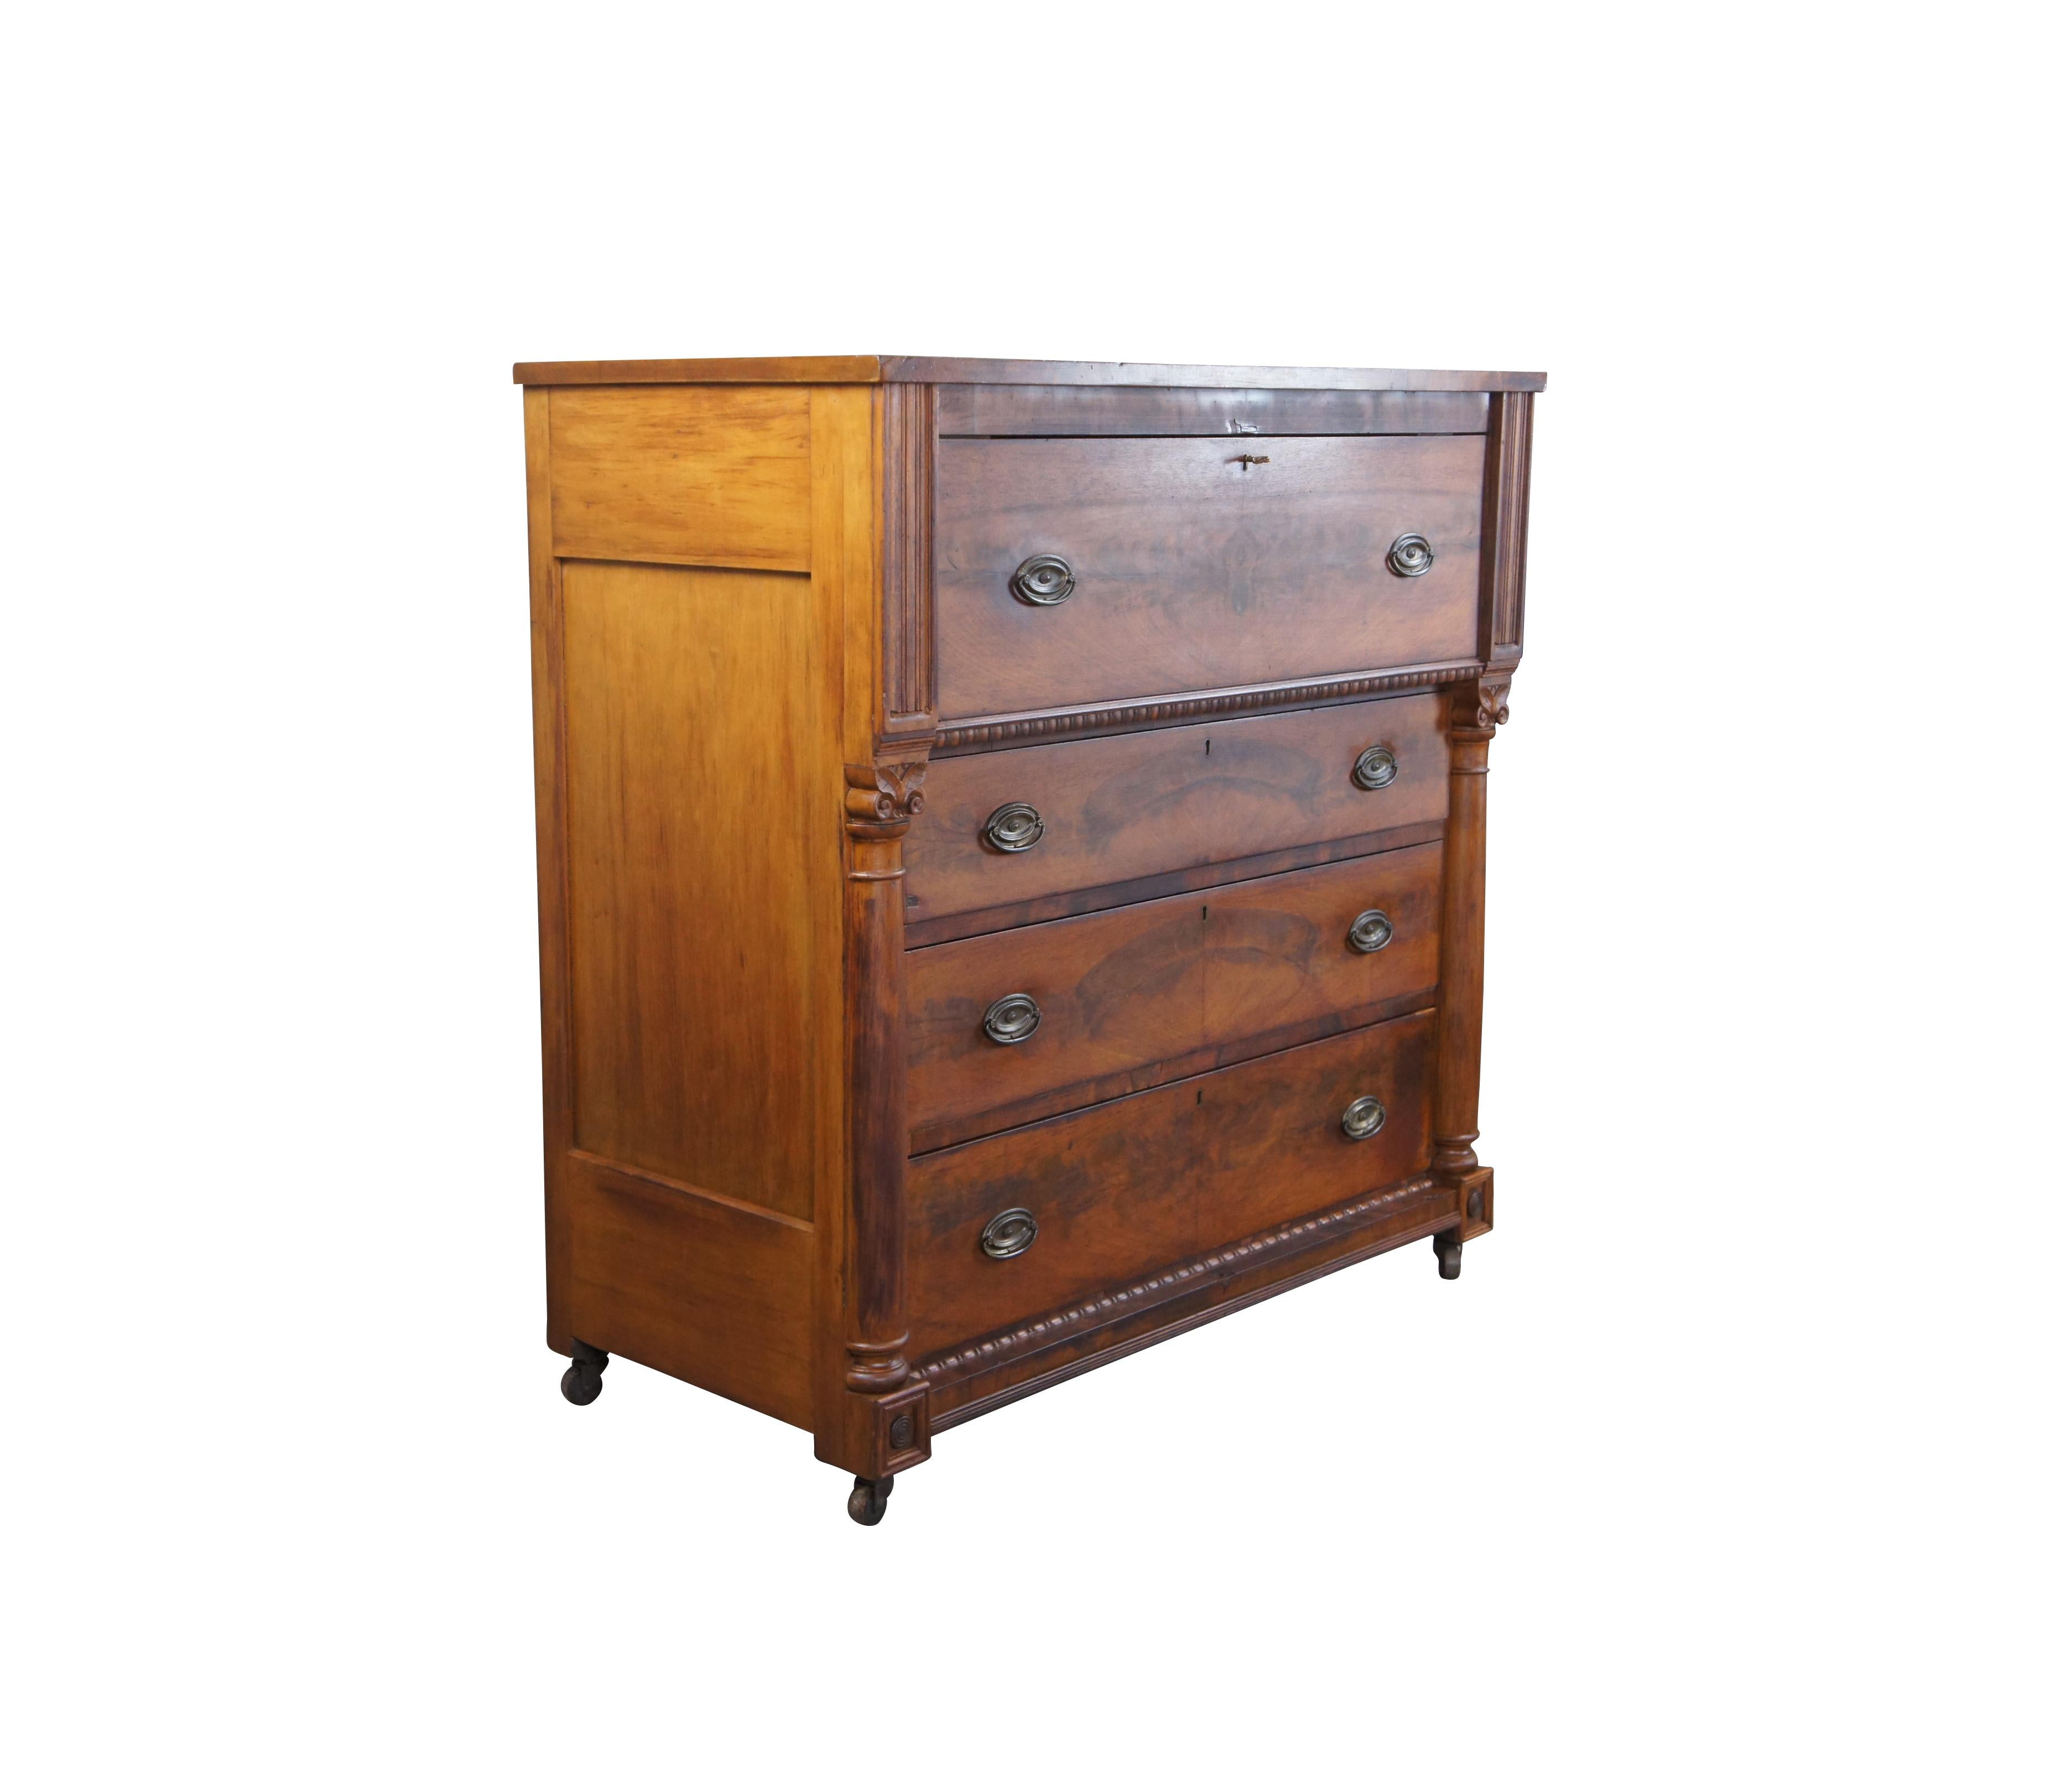 A beautiful Victorian Era tallboy dresser drawing inspiration from Federal styling, circa 1870s. Made from mahogany and cherry with matchbook (burl) veneer front. Features four hand dovetailed drawers with oval brass hardware. The stiles of the case